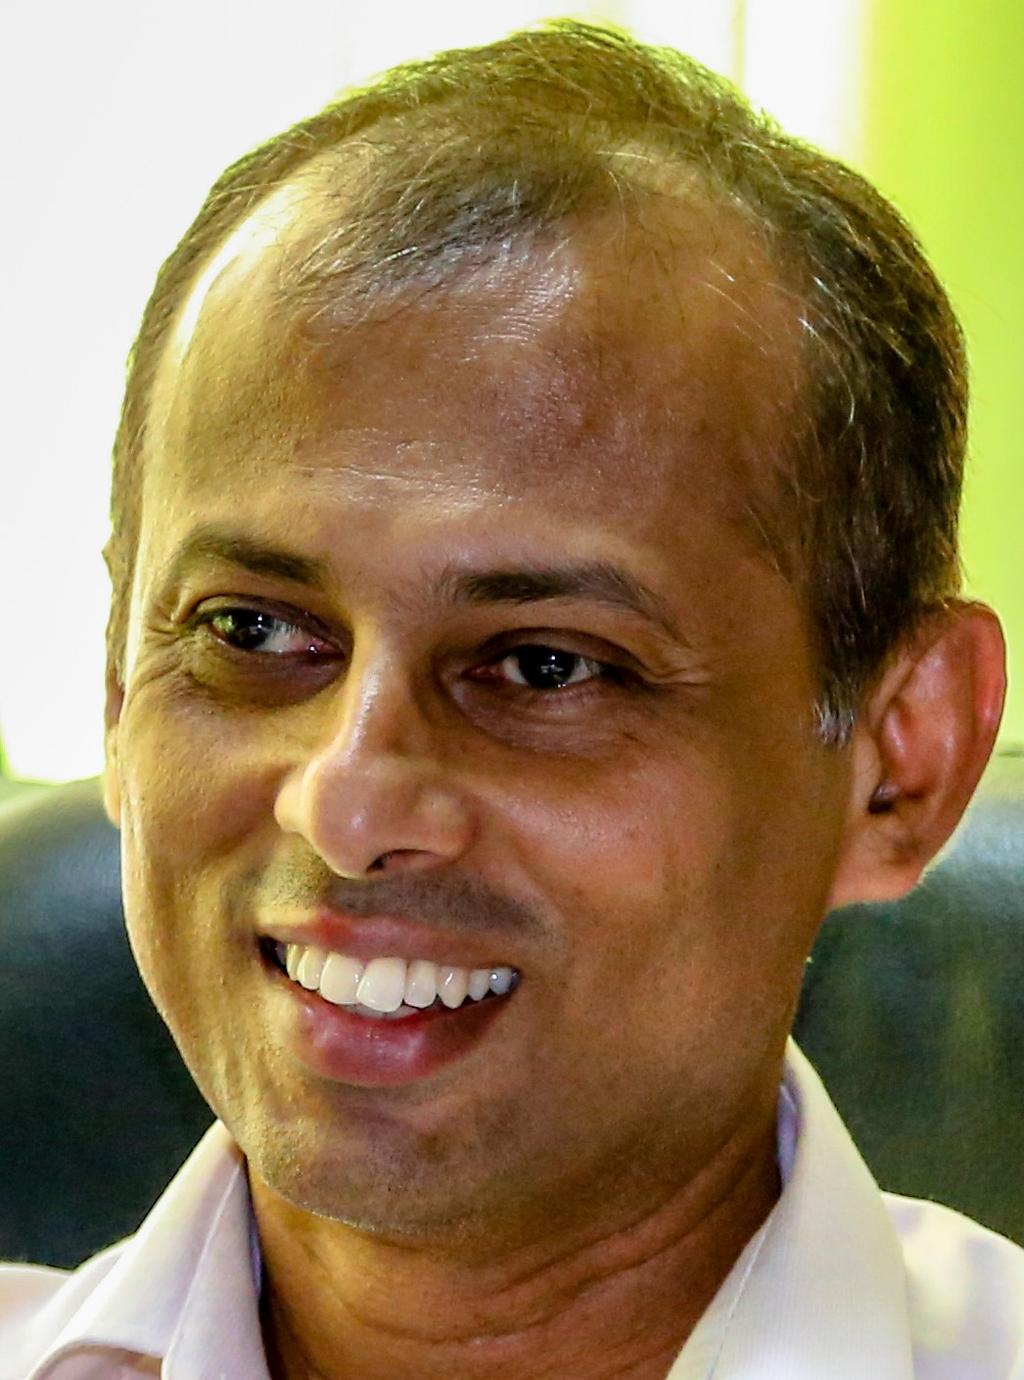 Profile of Jagath Nandana Munasinghe BSc (BE), MSc(Architecture), MSc (Town & Country Planning) RIBA, AIASL, MITPSL, PhD (NUS) Senior Lecturer Department of Town & Country Planning University of